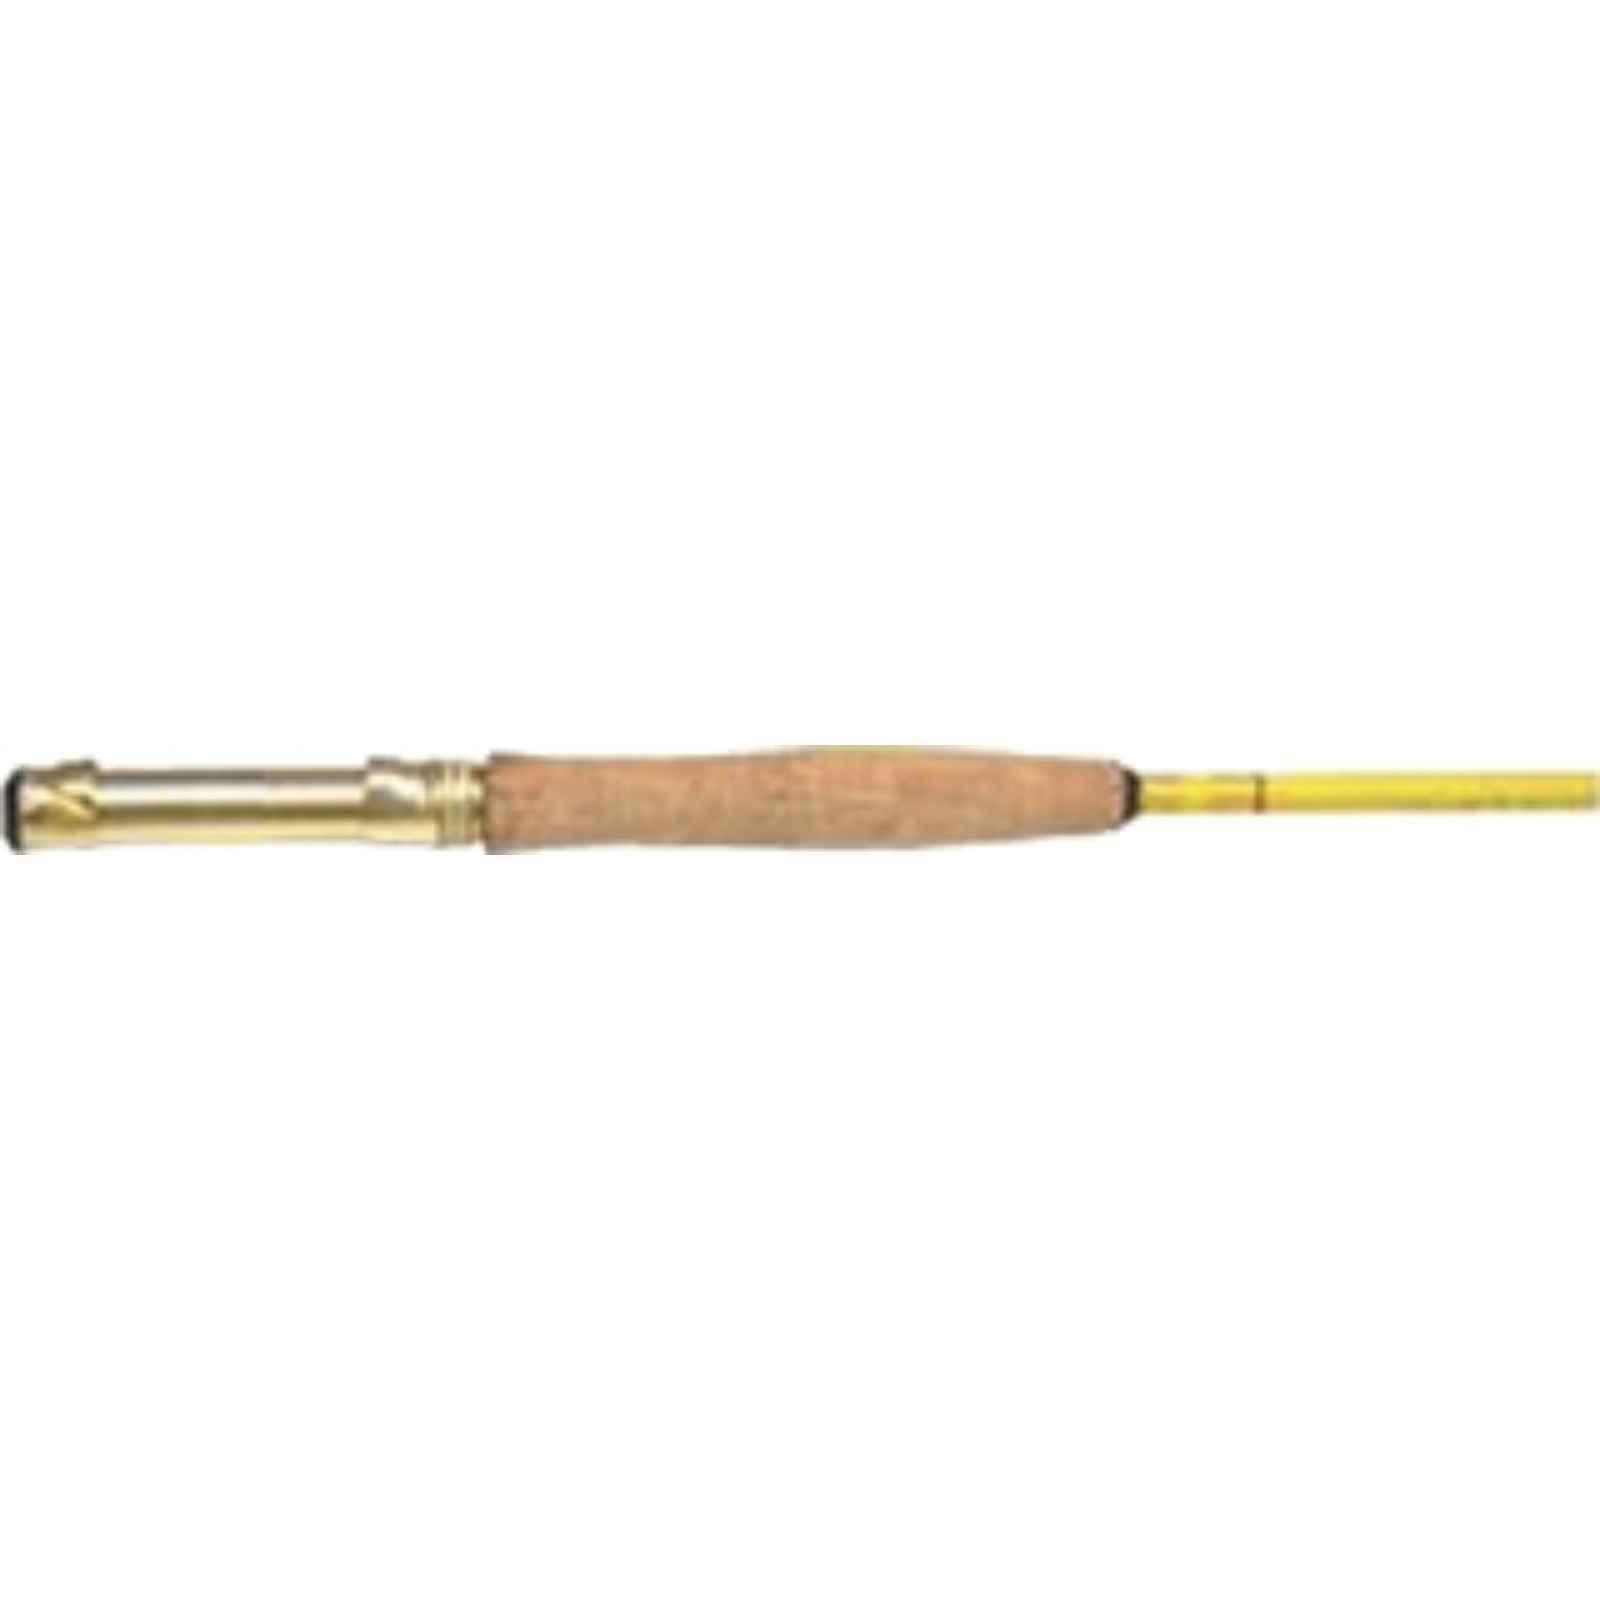 Eagle Claw Featherlight 3/4 Line Weight Fly Rod 2 Piece Yellow, 6-Feet 6-In... 